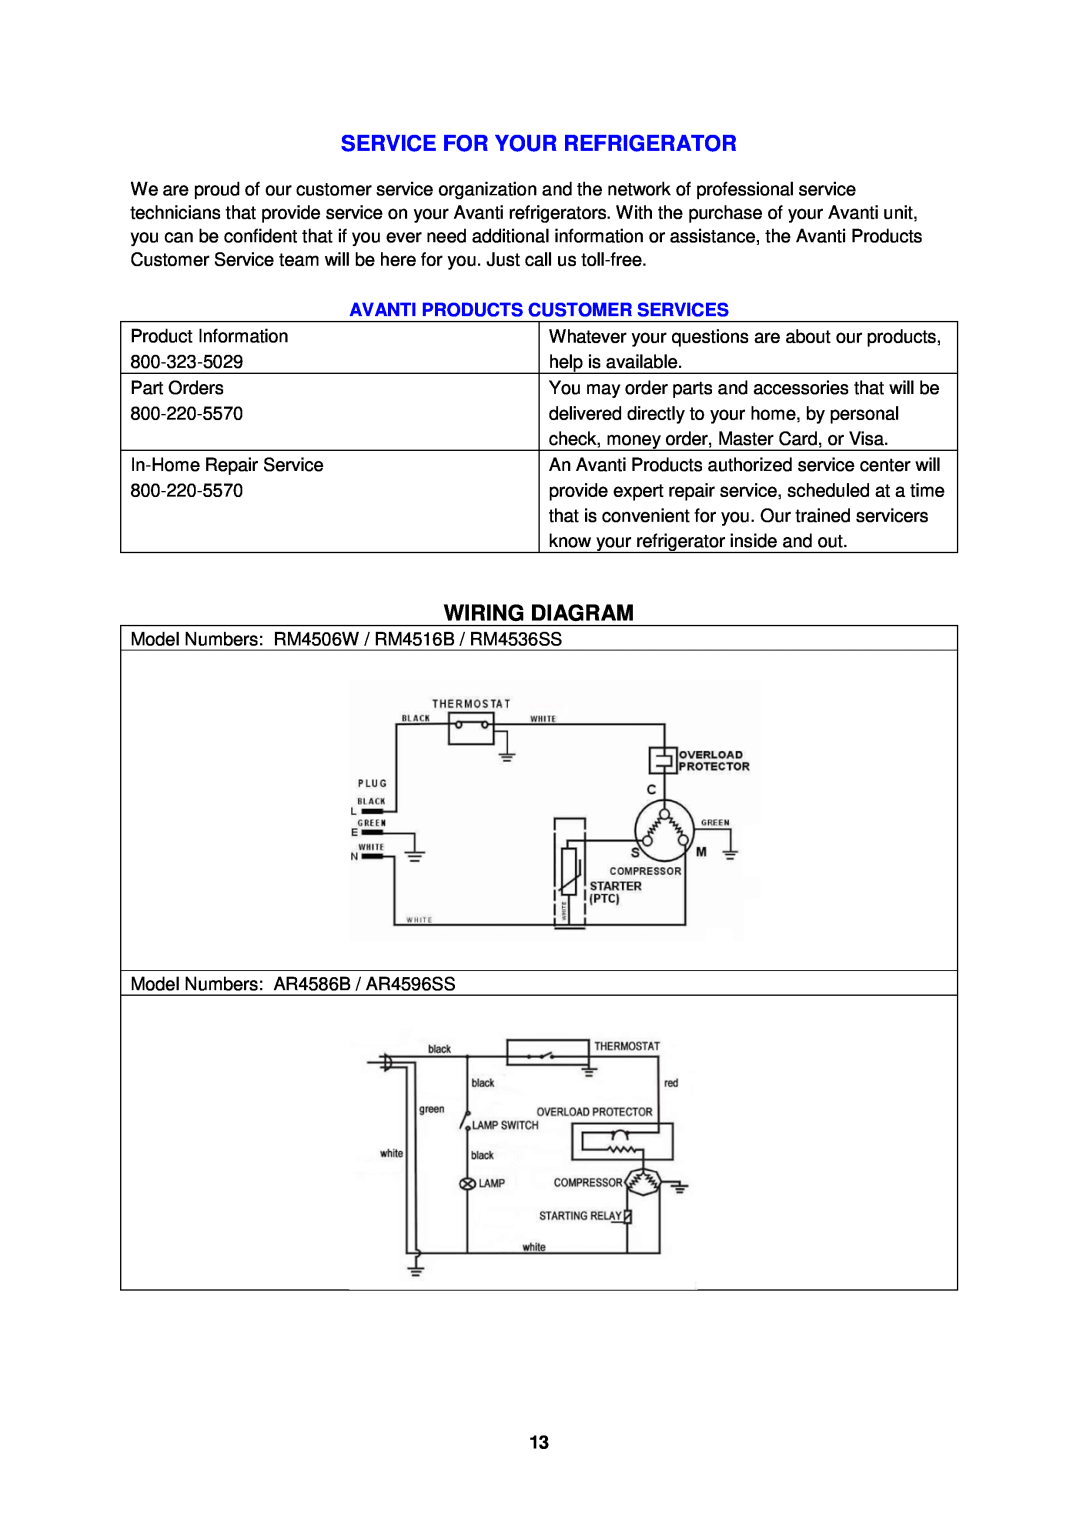 Avanti AR4586B instruction manual Service For Your Refrigerator, Wiring Diagram, Avanti Products Customer Services 